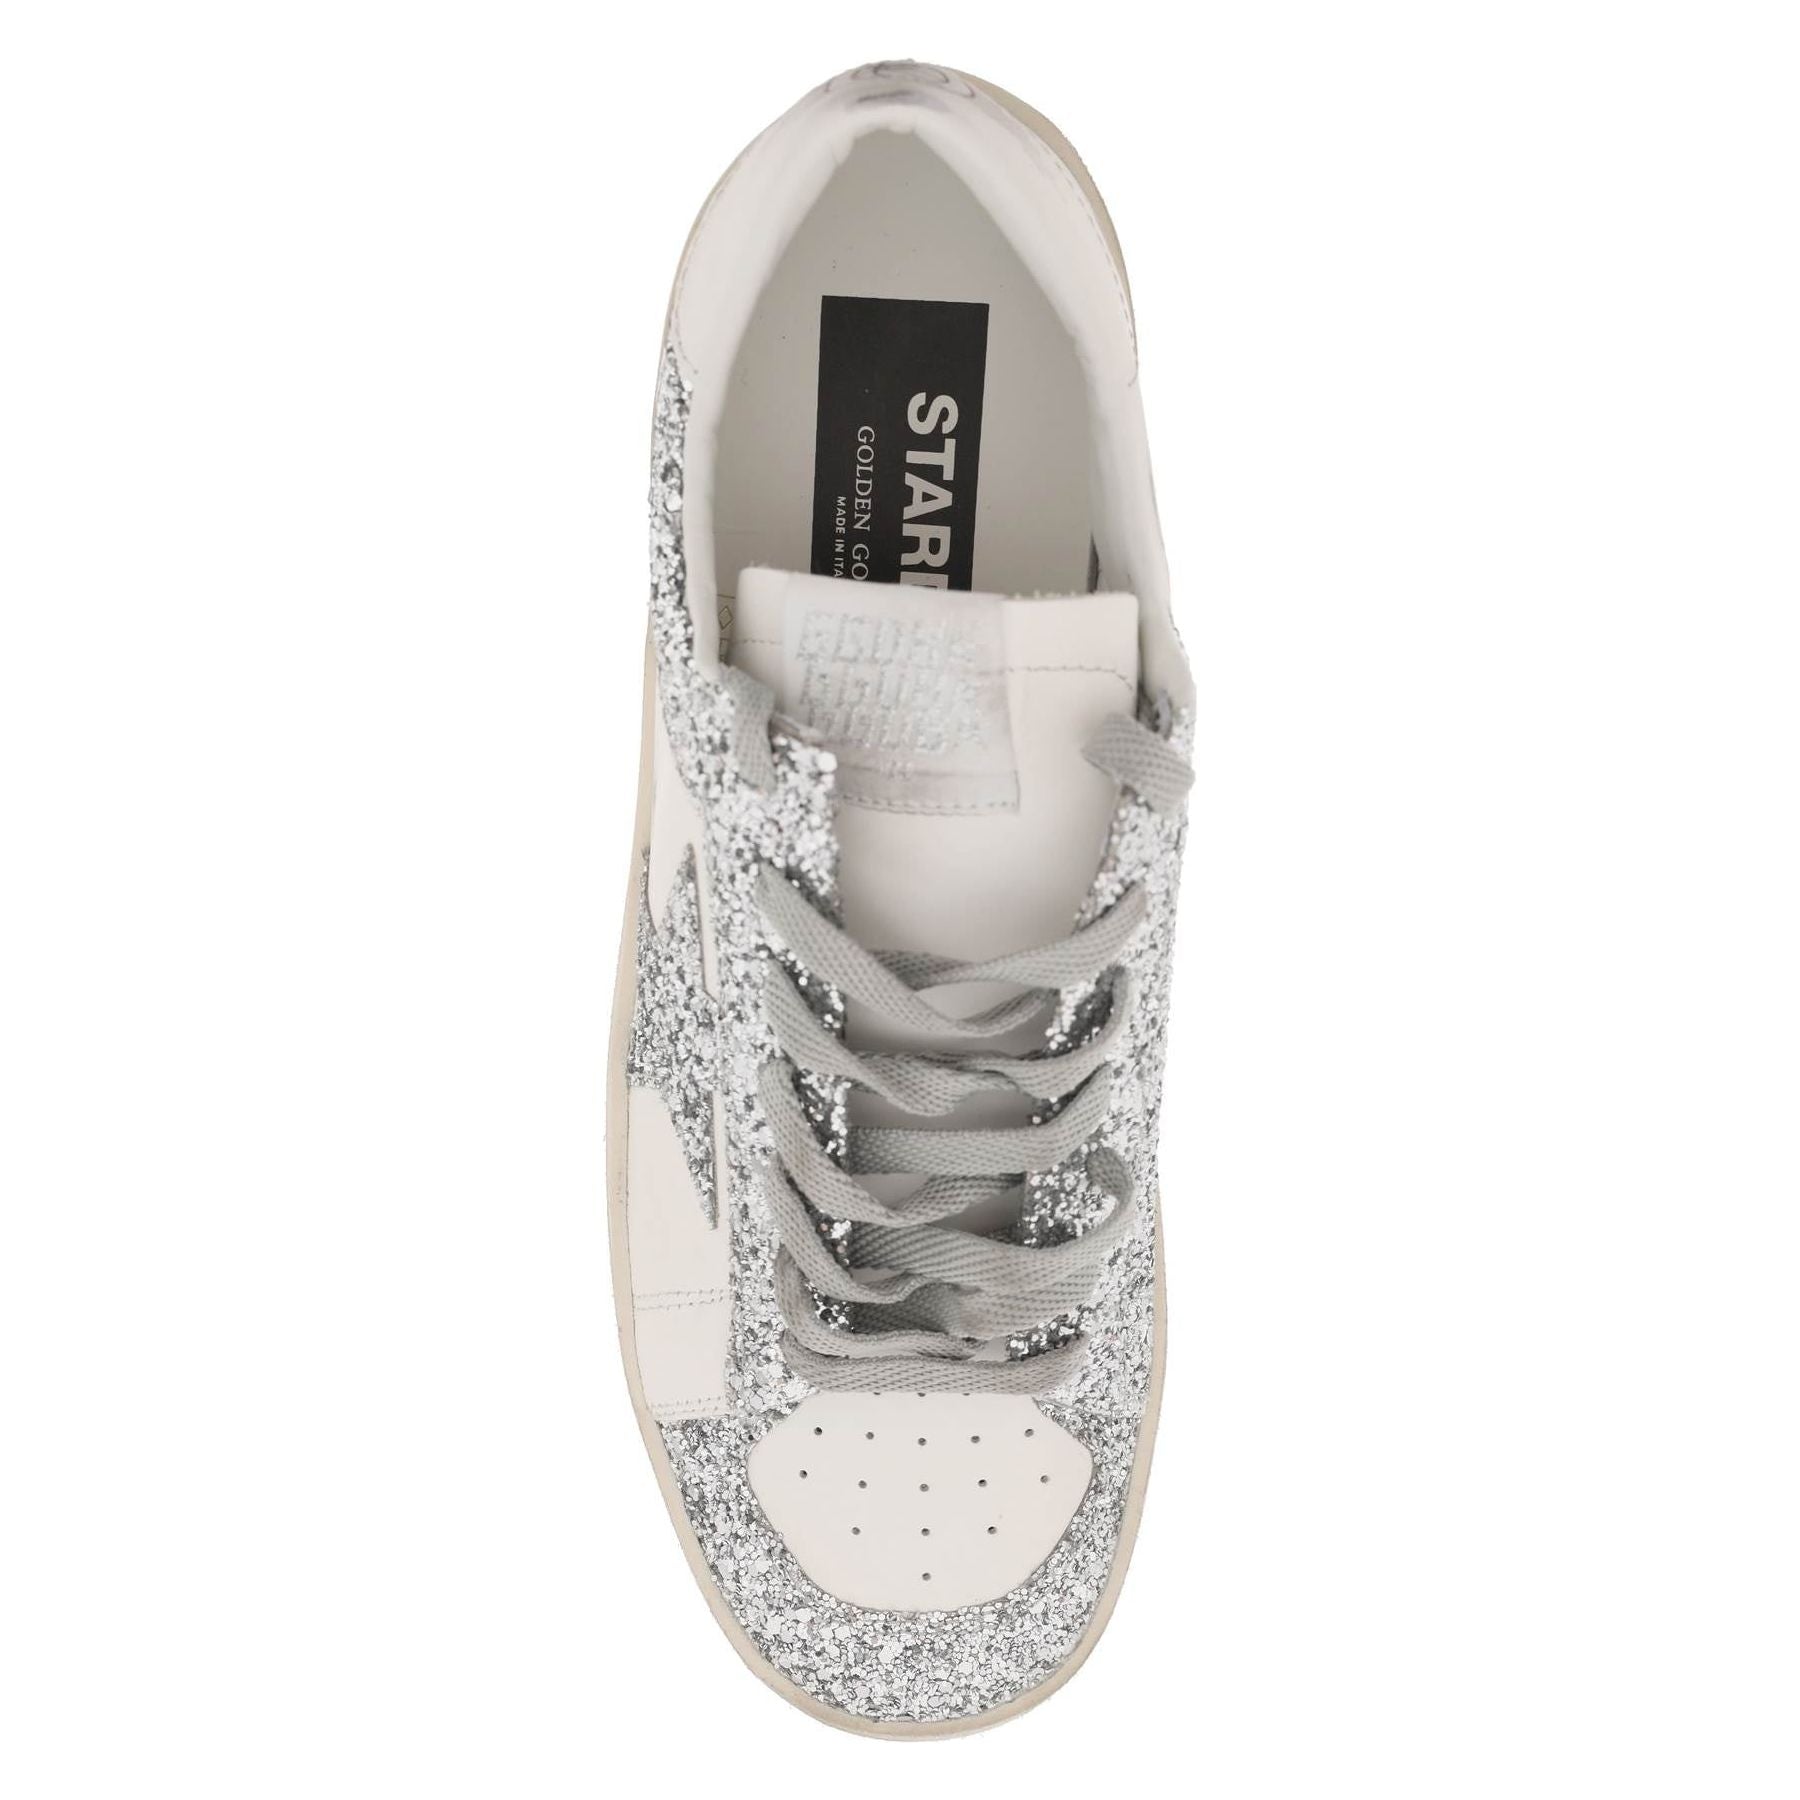 Stardan Glitter and Leather Sneakers